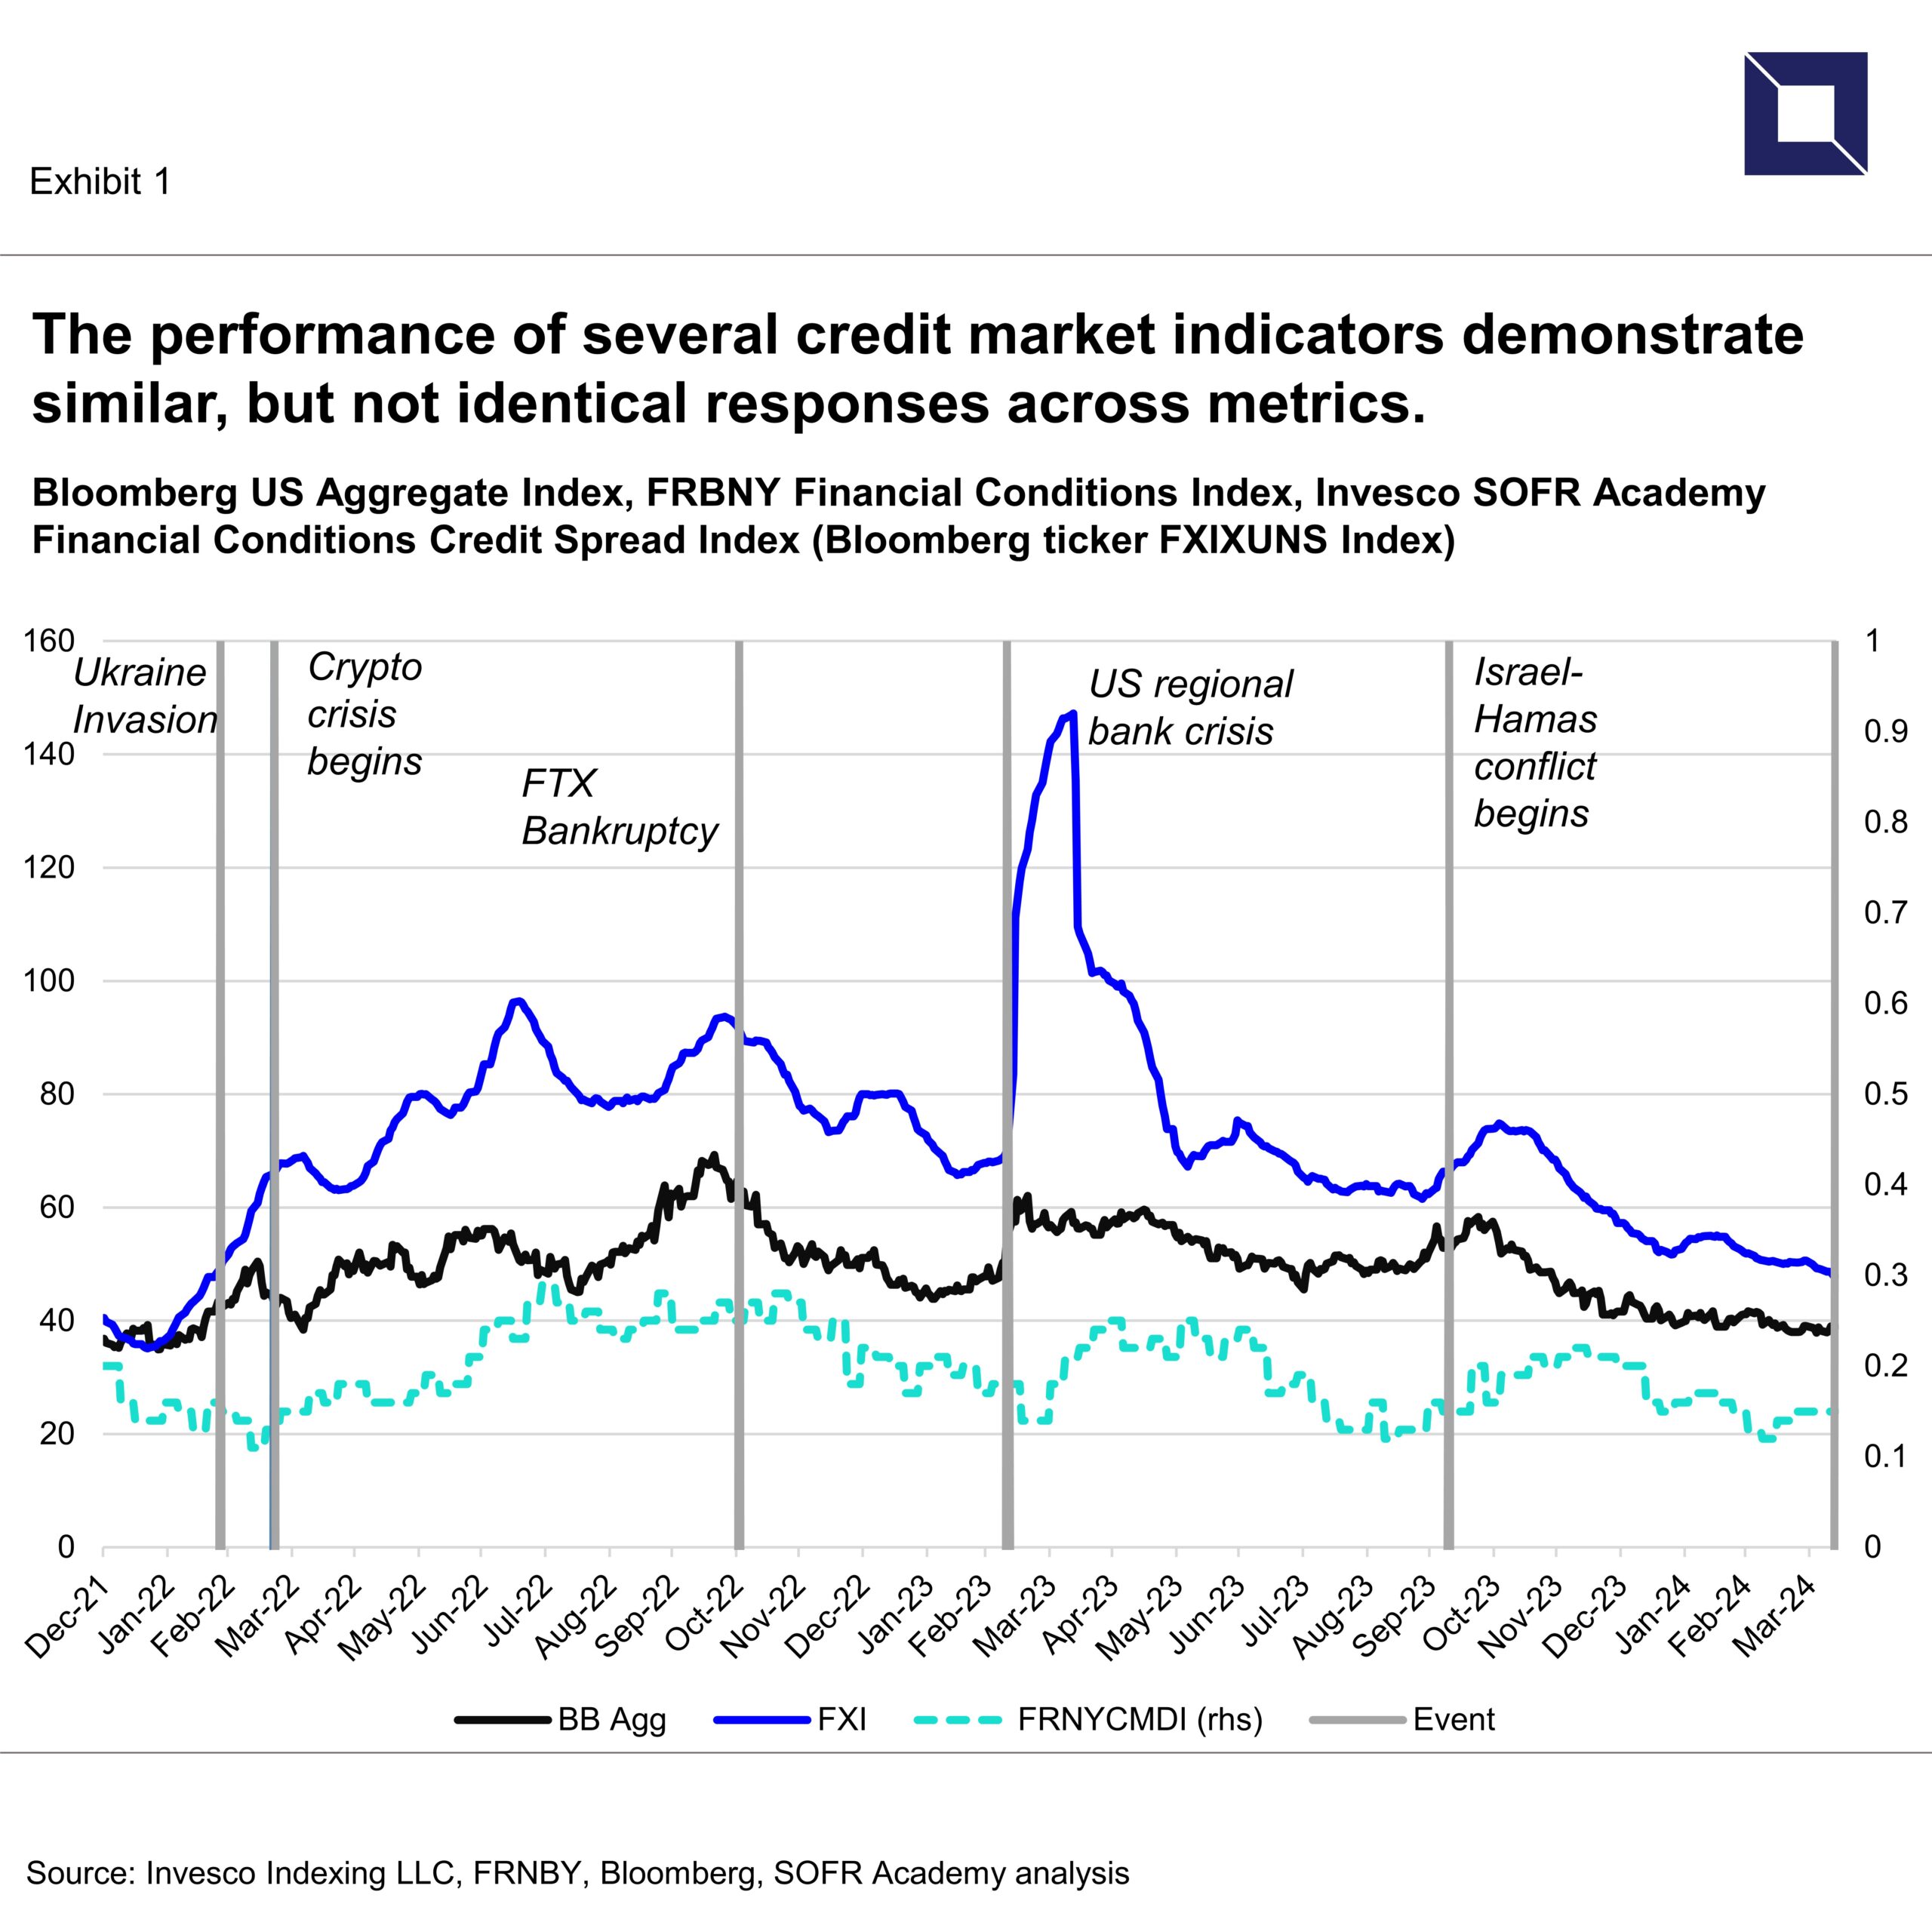 The performance of several credit market indicators demonstrate similar, but not identical responses across metrics | SOFR Academy